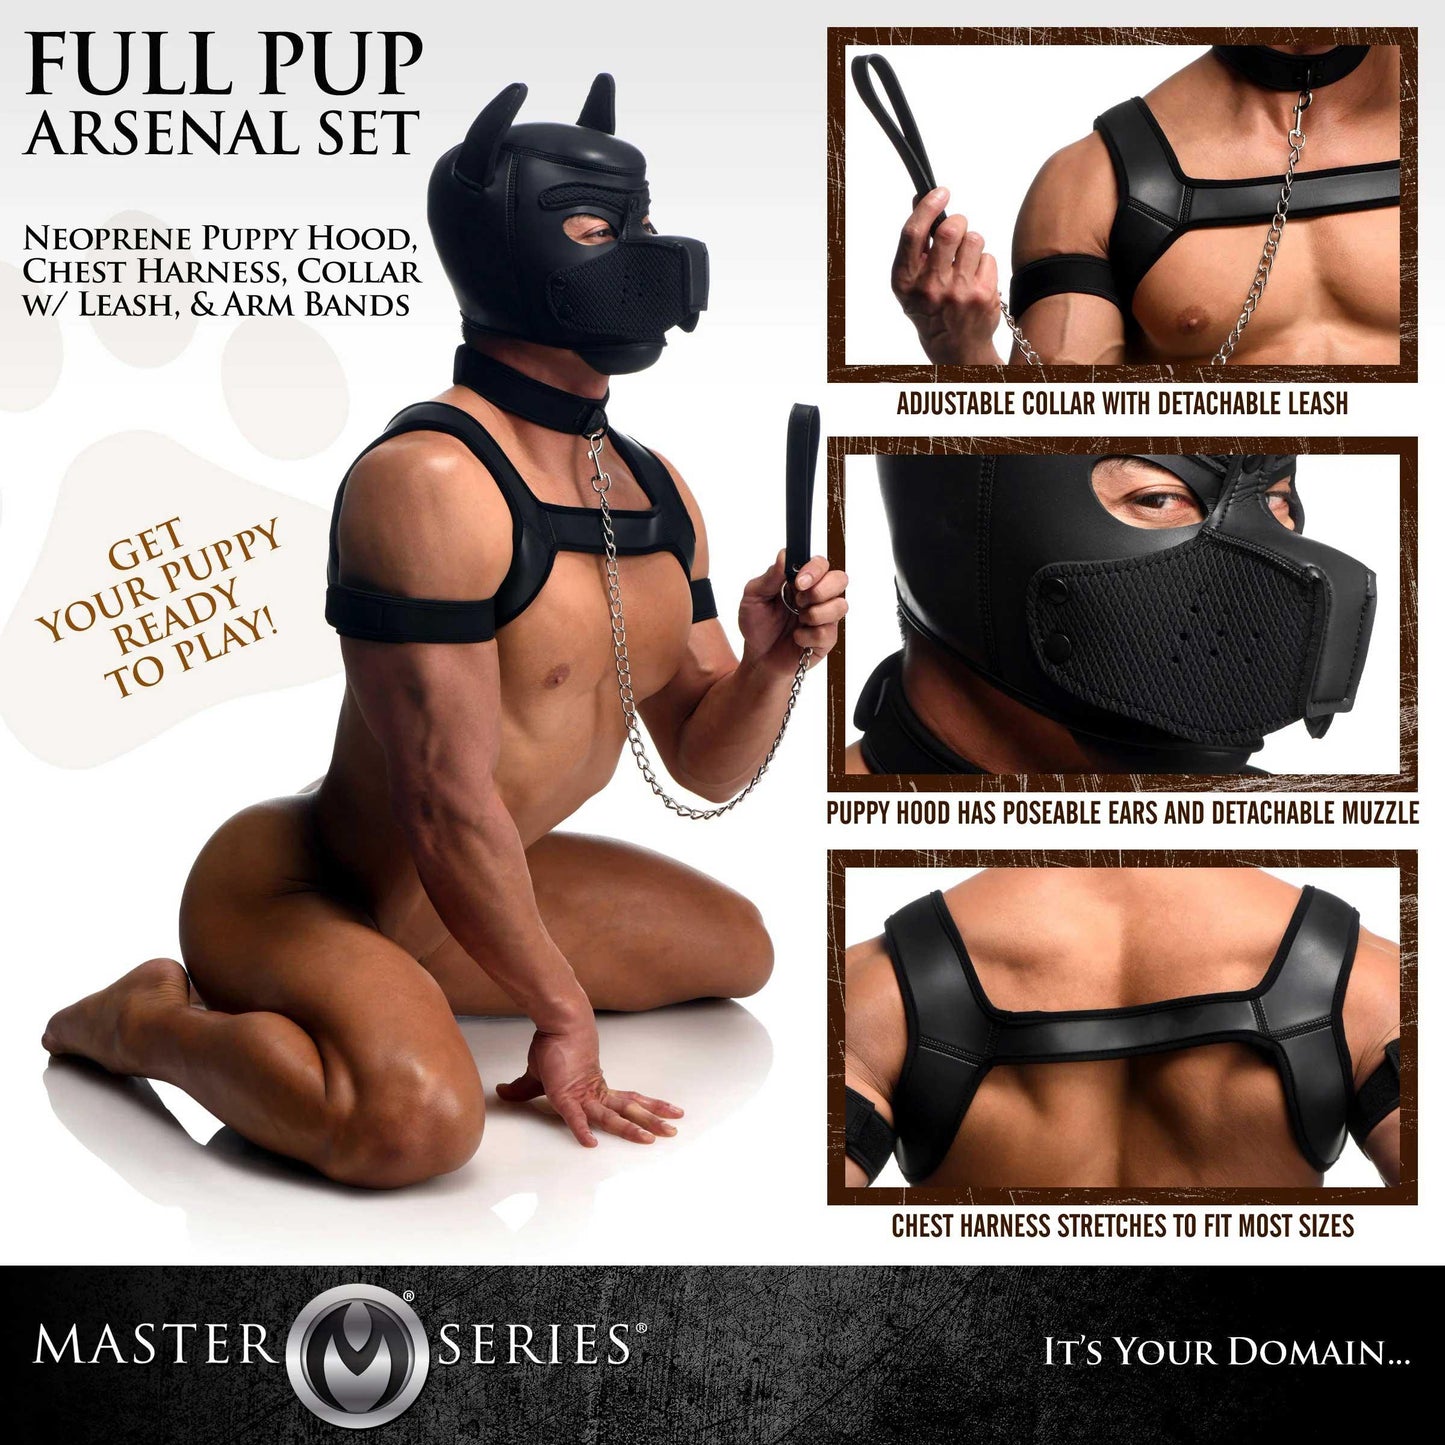 Full Pup Arsenal Set Neoprene Puppy Hood, Chest Harness, Collar With Leash and Arm Band - Black - My Sex Toy Hub